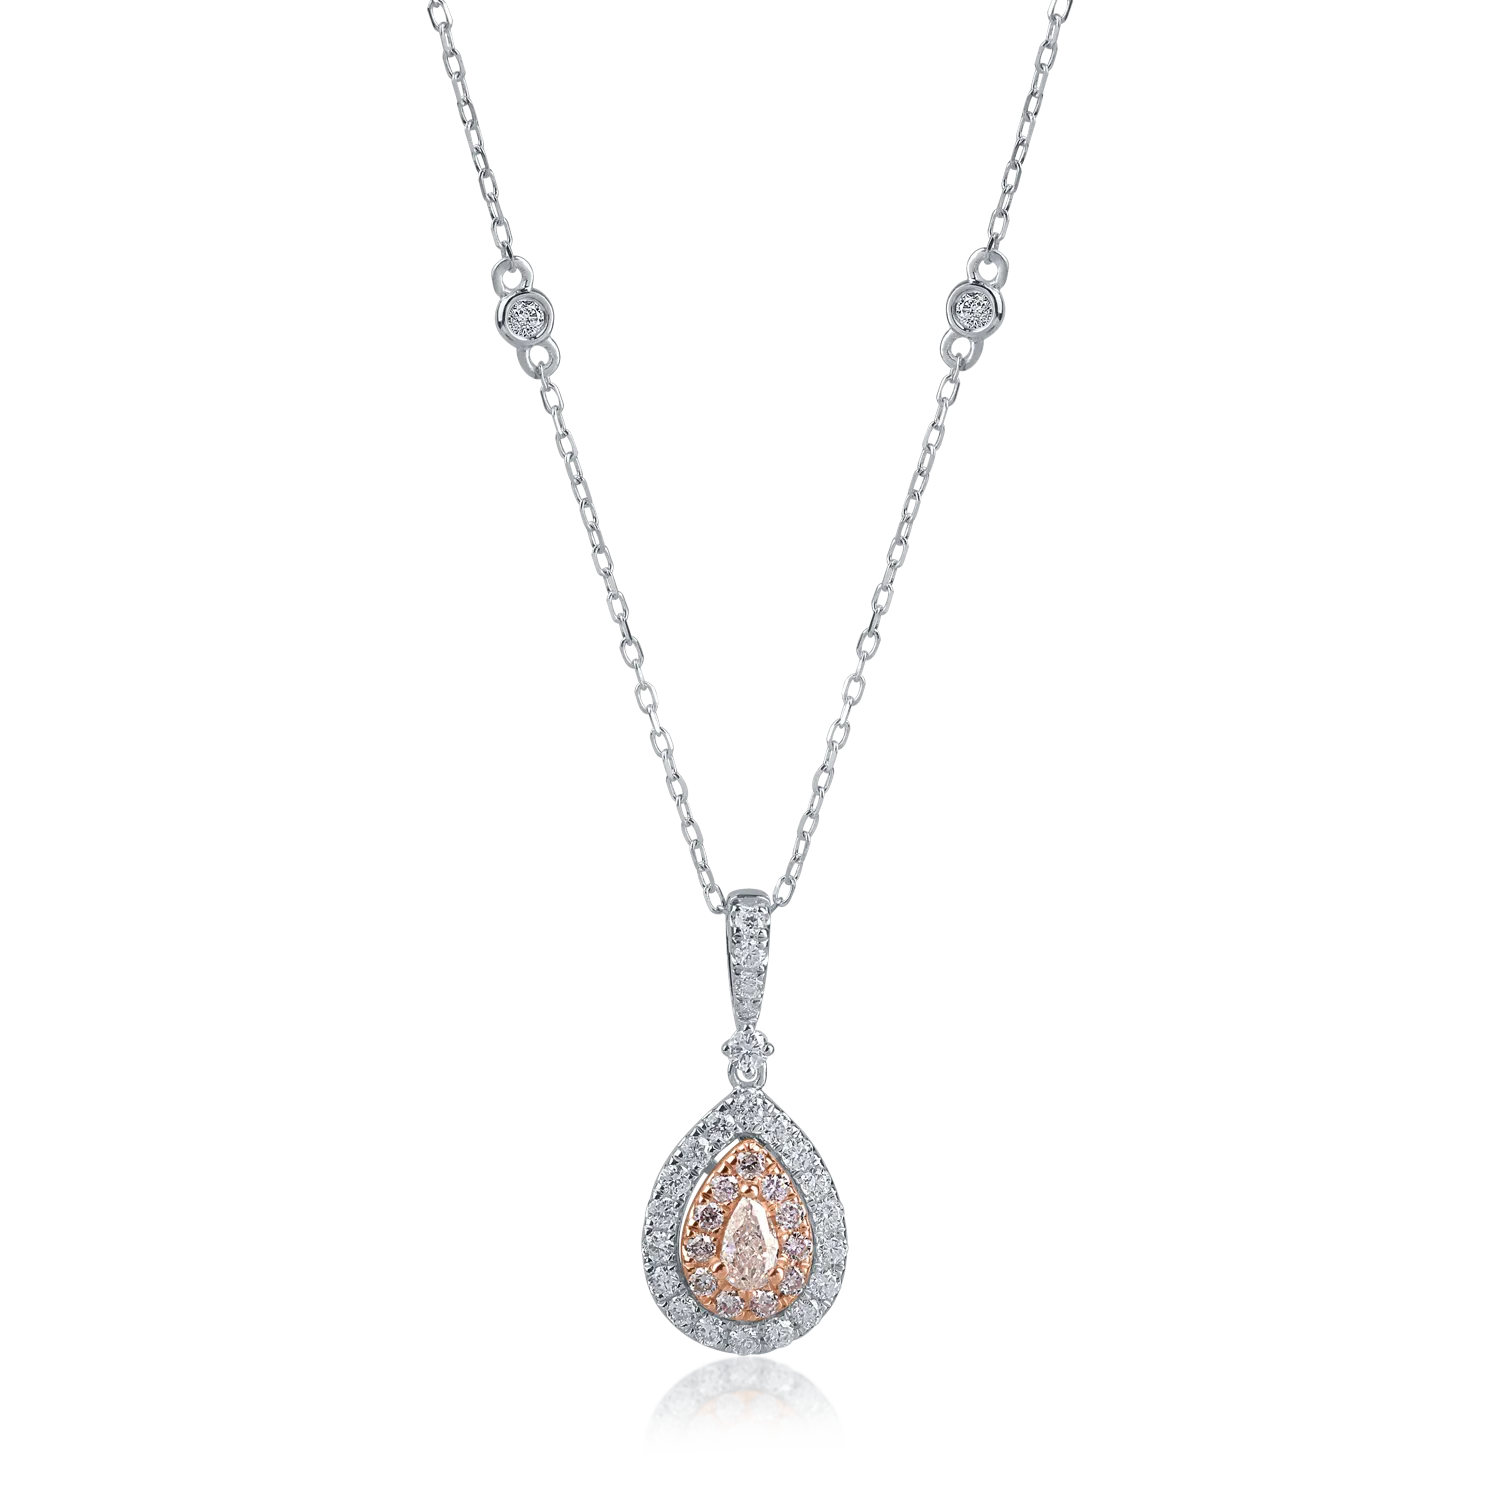 White-rose gold pendant necklace with 0.31ct clear diamonds and 0.25ct pink diamonds